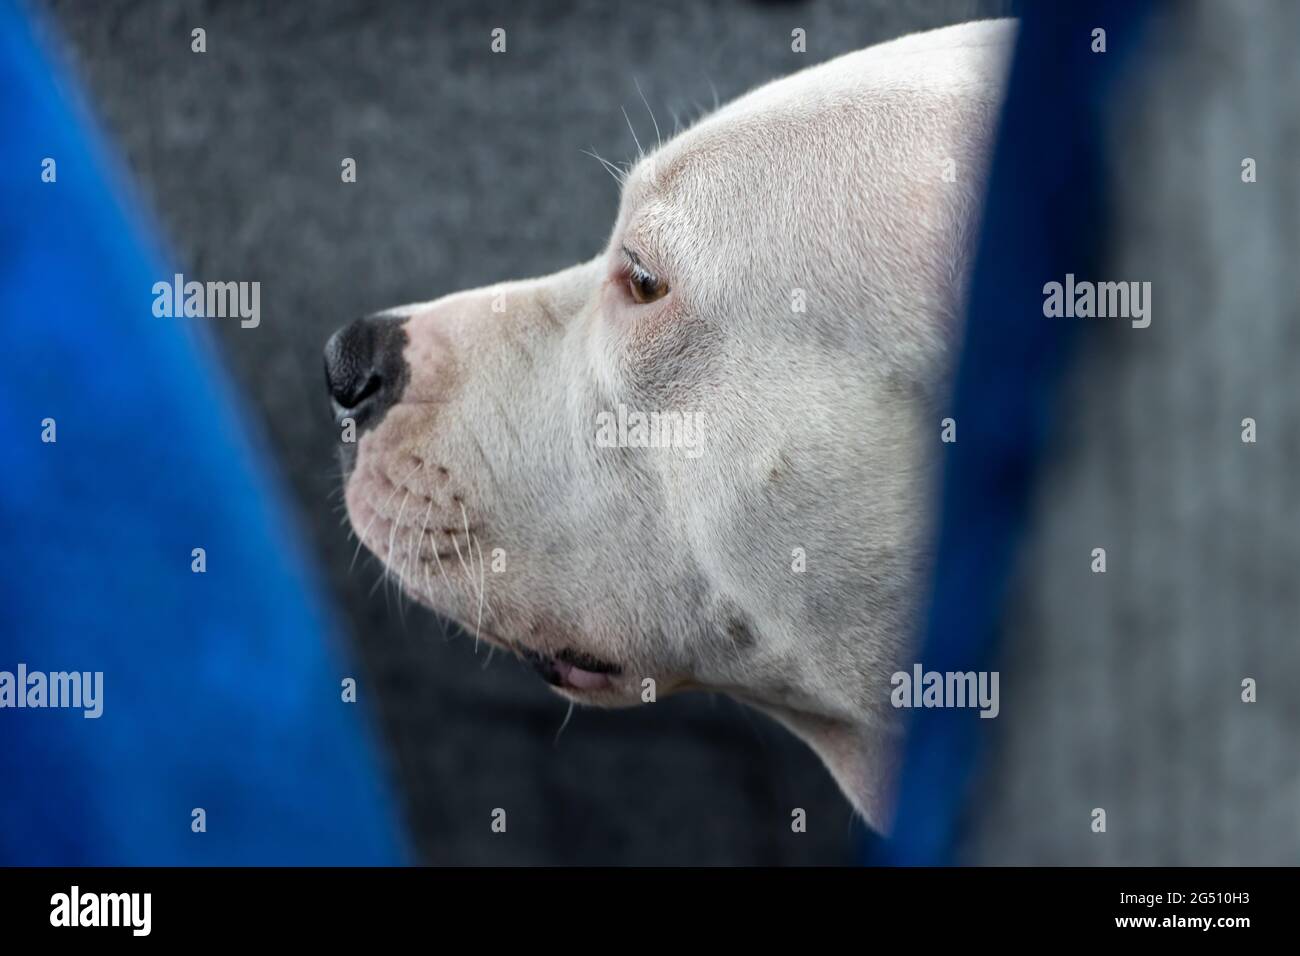 White dog head of bull terrier between seats at a bus. Stock Photo